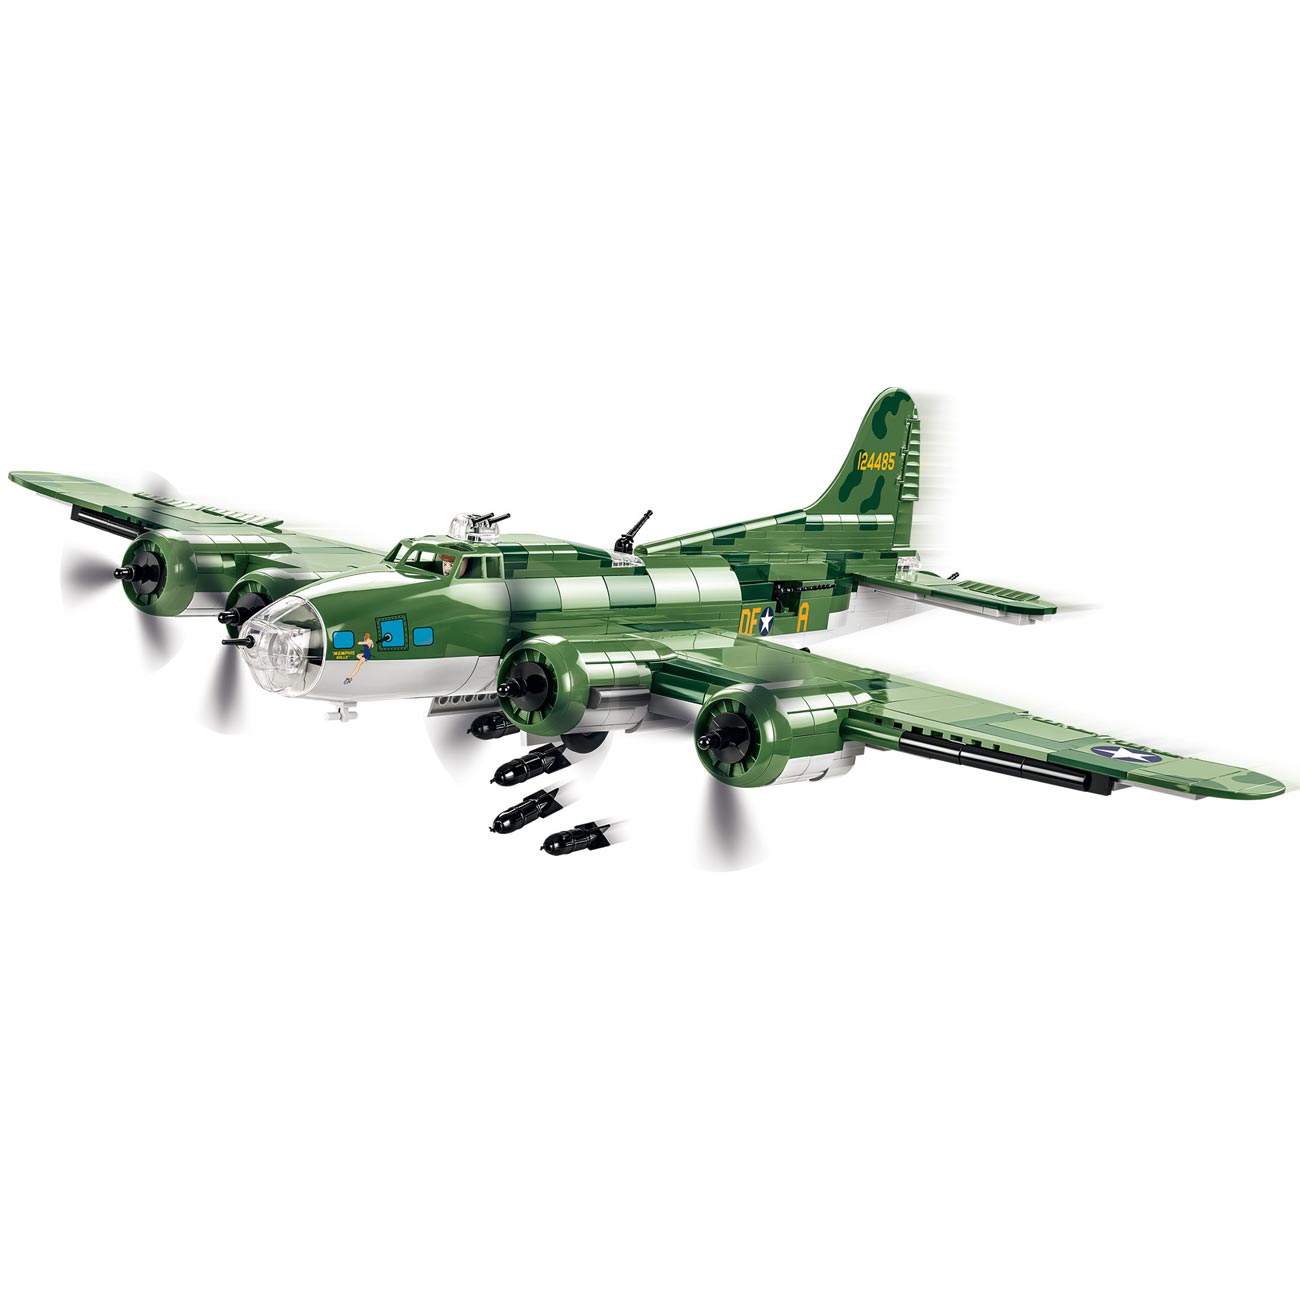 Cobi Historical Collection Bausatz Flugzeug Boeing B-17F Flying Fortress Memphis 920 Teile 5707